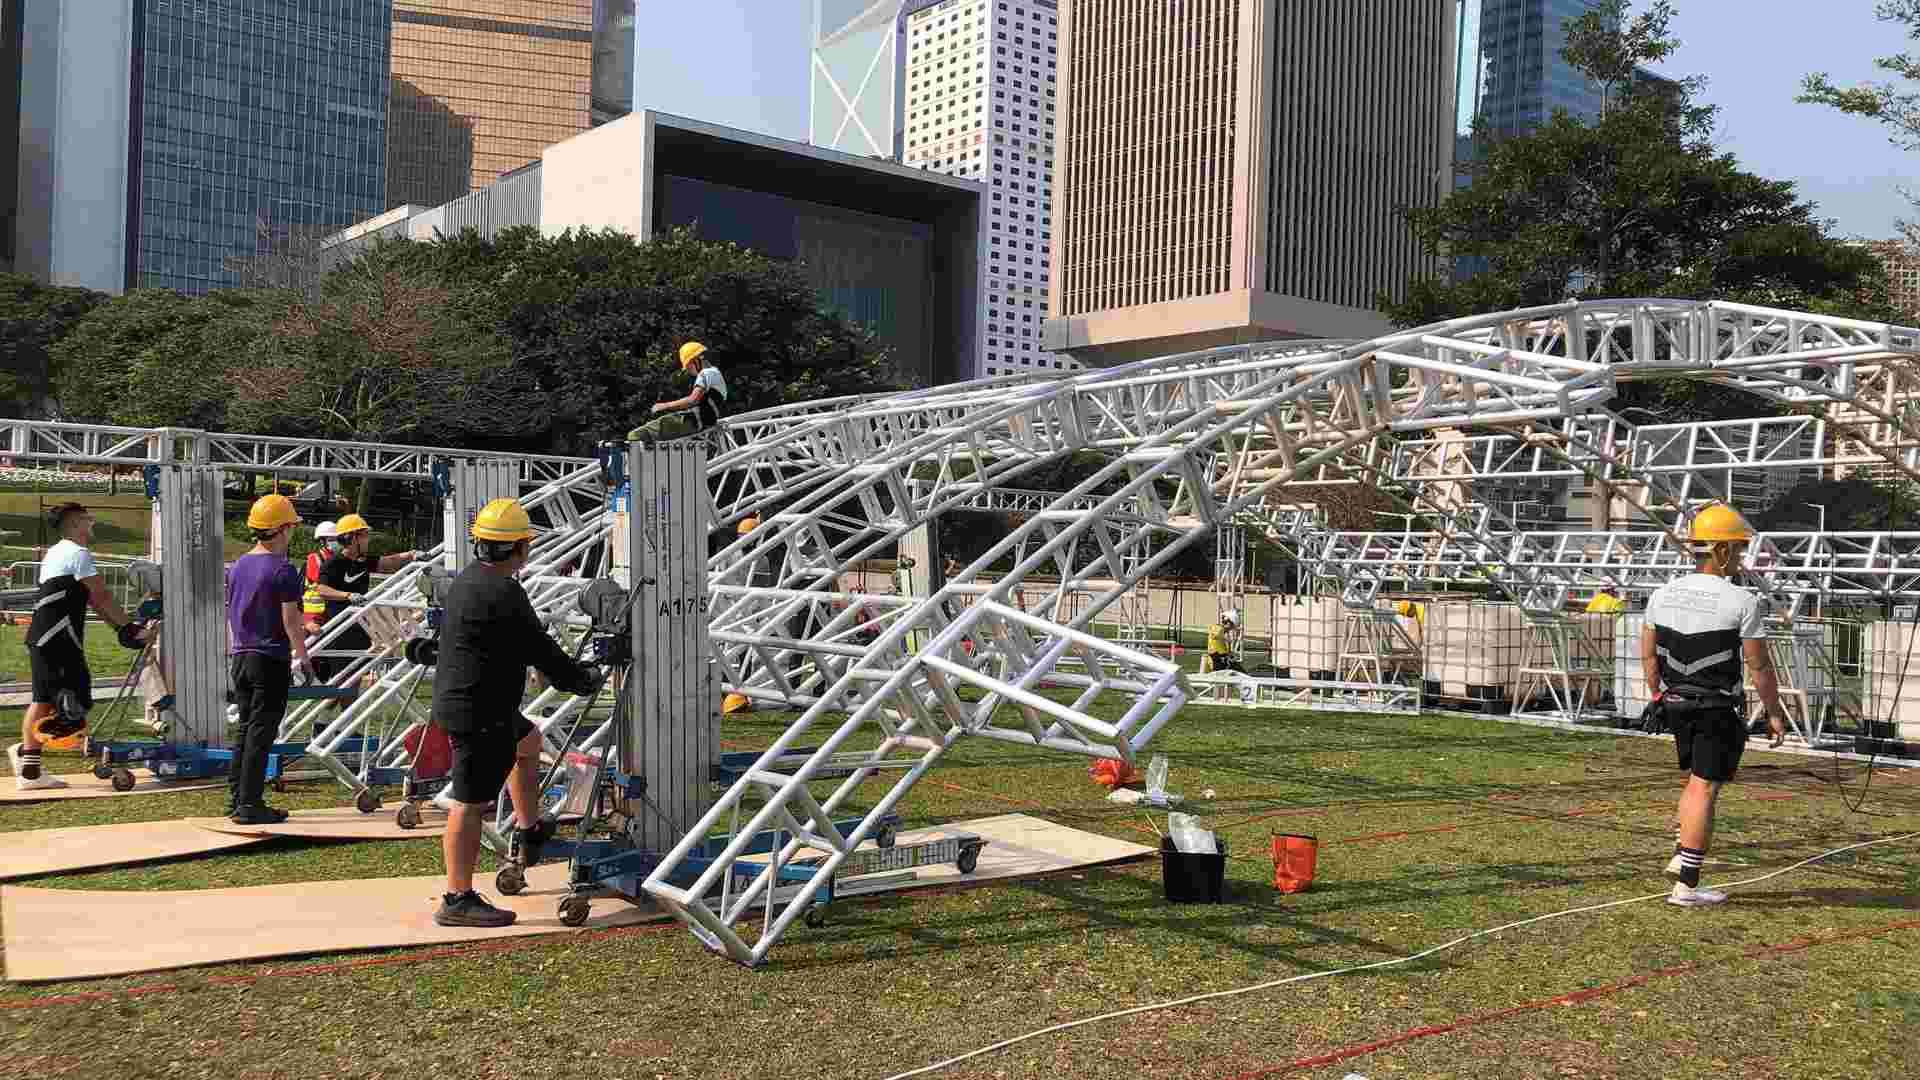 How do I assemble and disassemble a lighting truss?